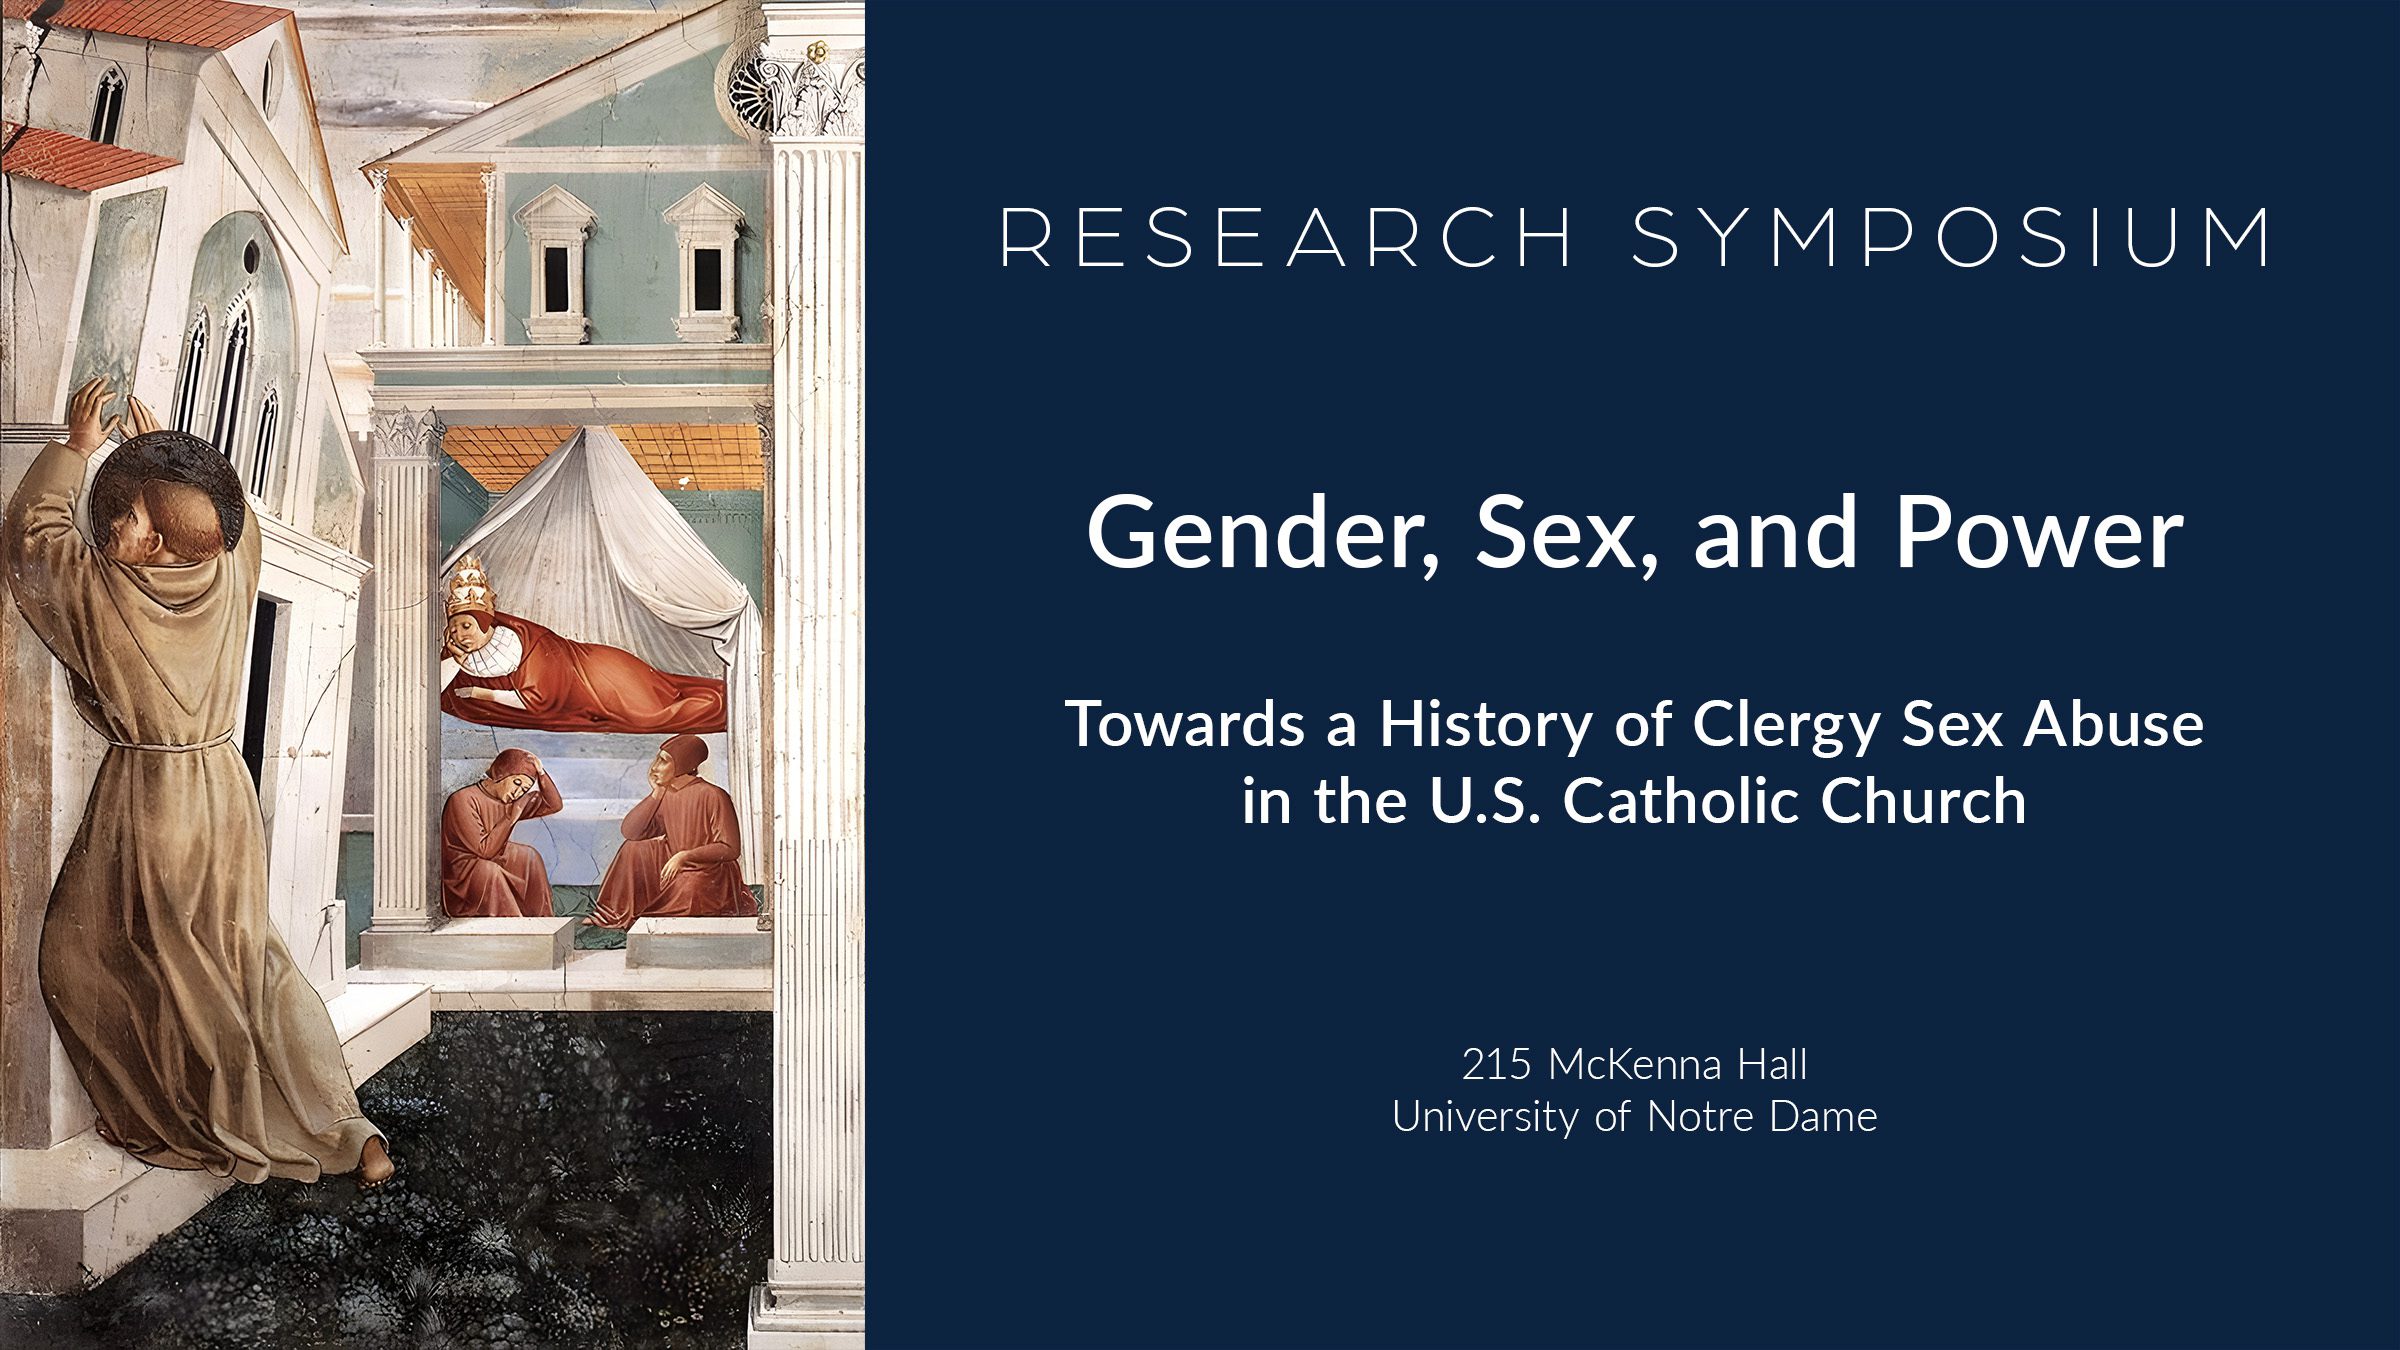 Gender, Sex, and Power: Towards a History of Clergy Sex Abuse in the U.S. Catholic Church